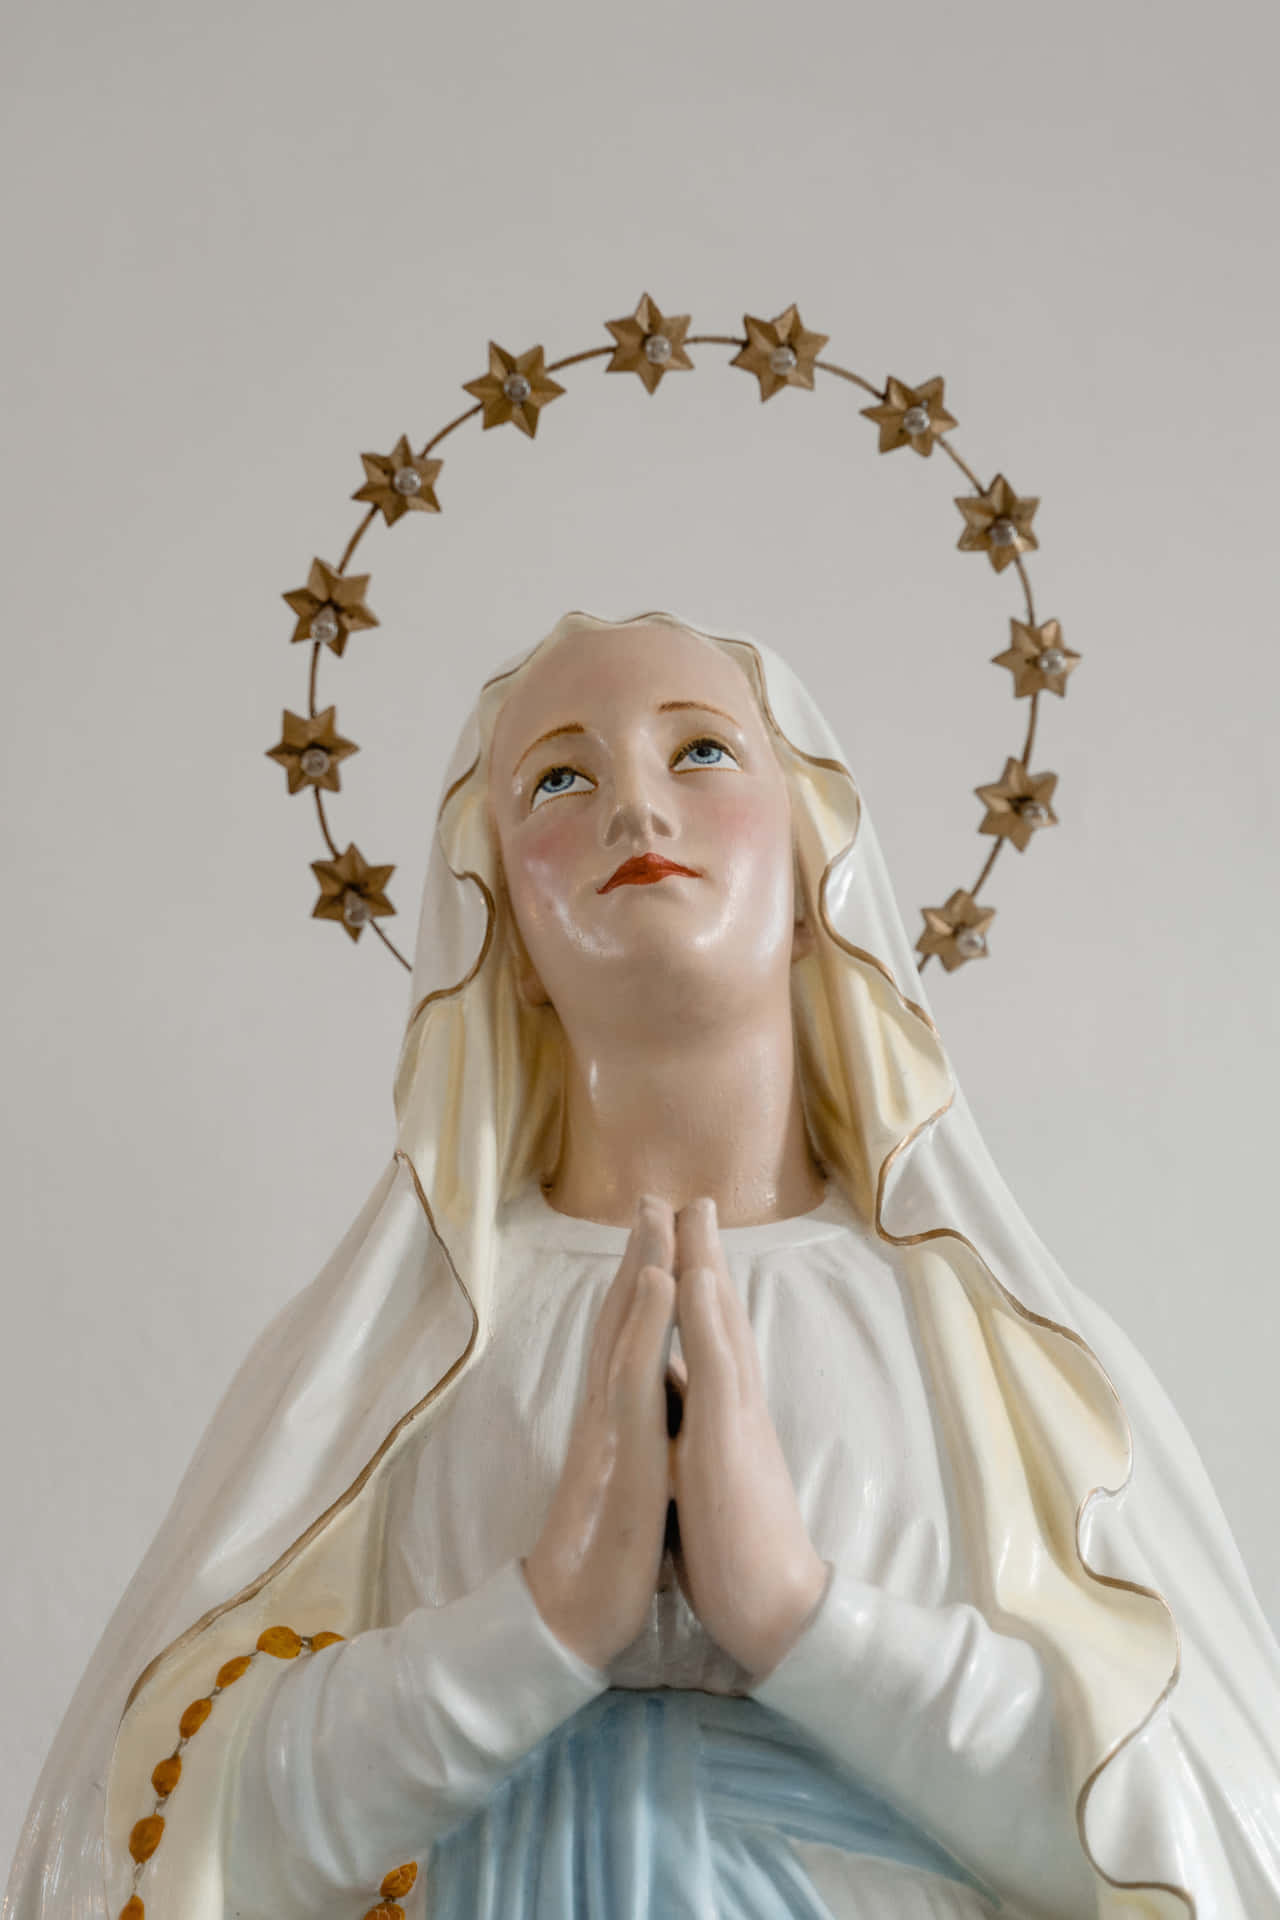 A Statue Of Mary Praying With Stars